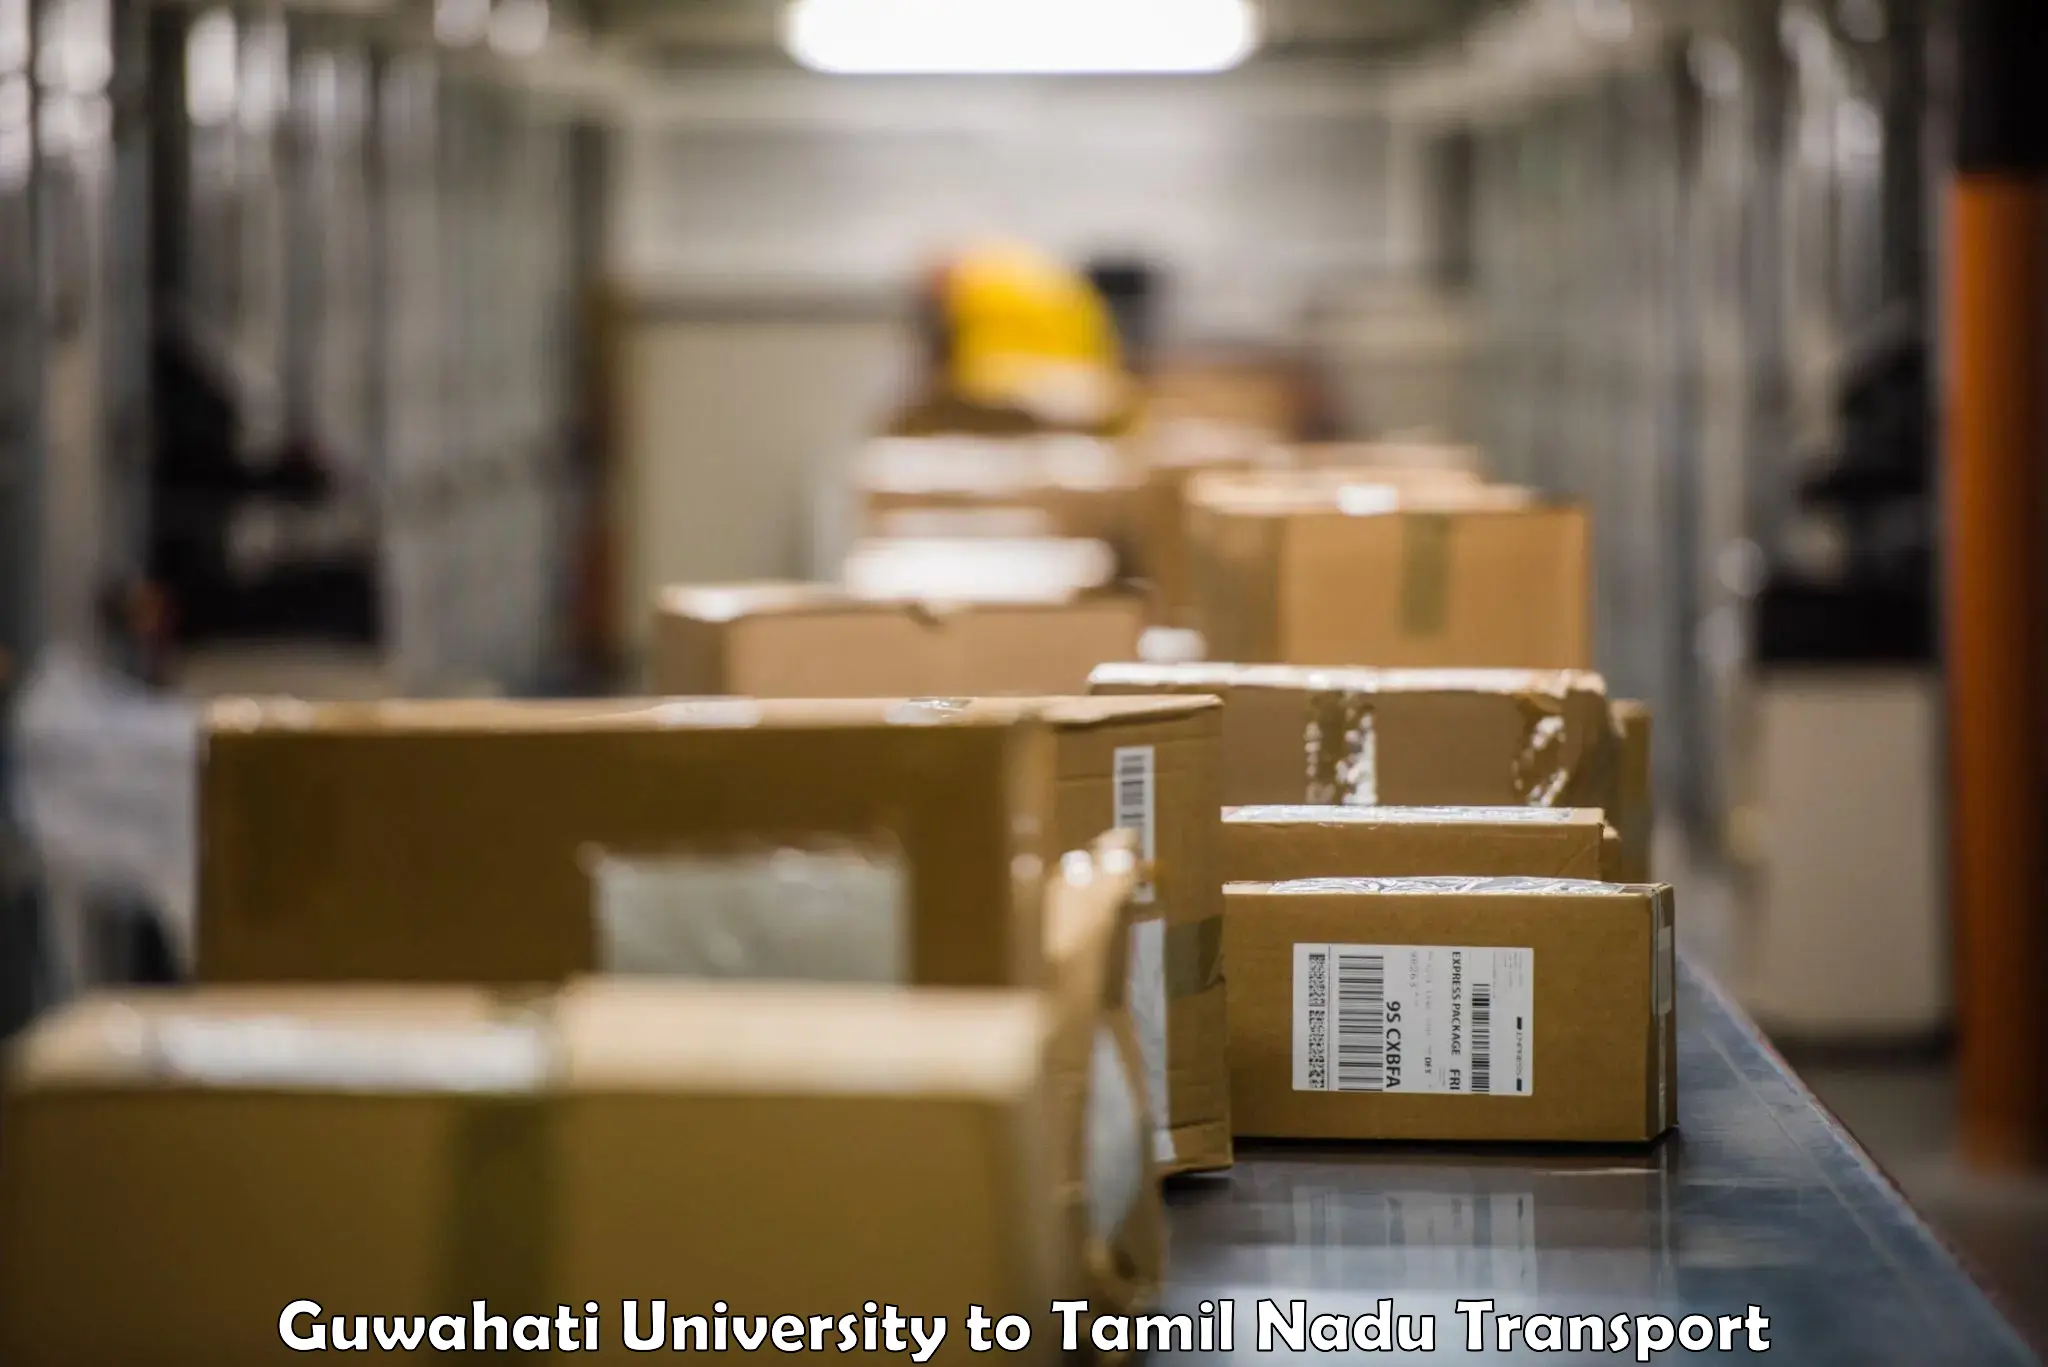 Material transport services Guwahati University to Pollachi